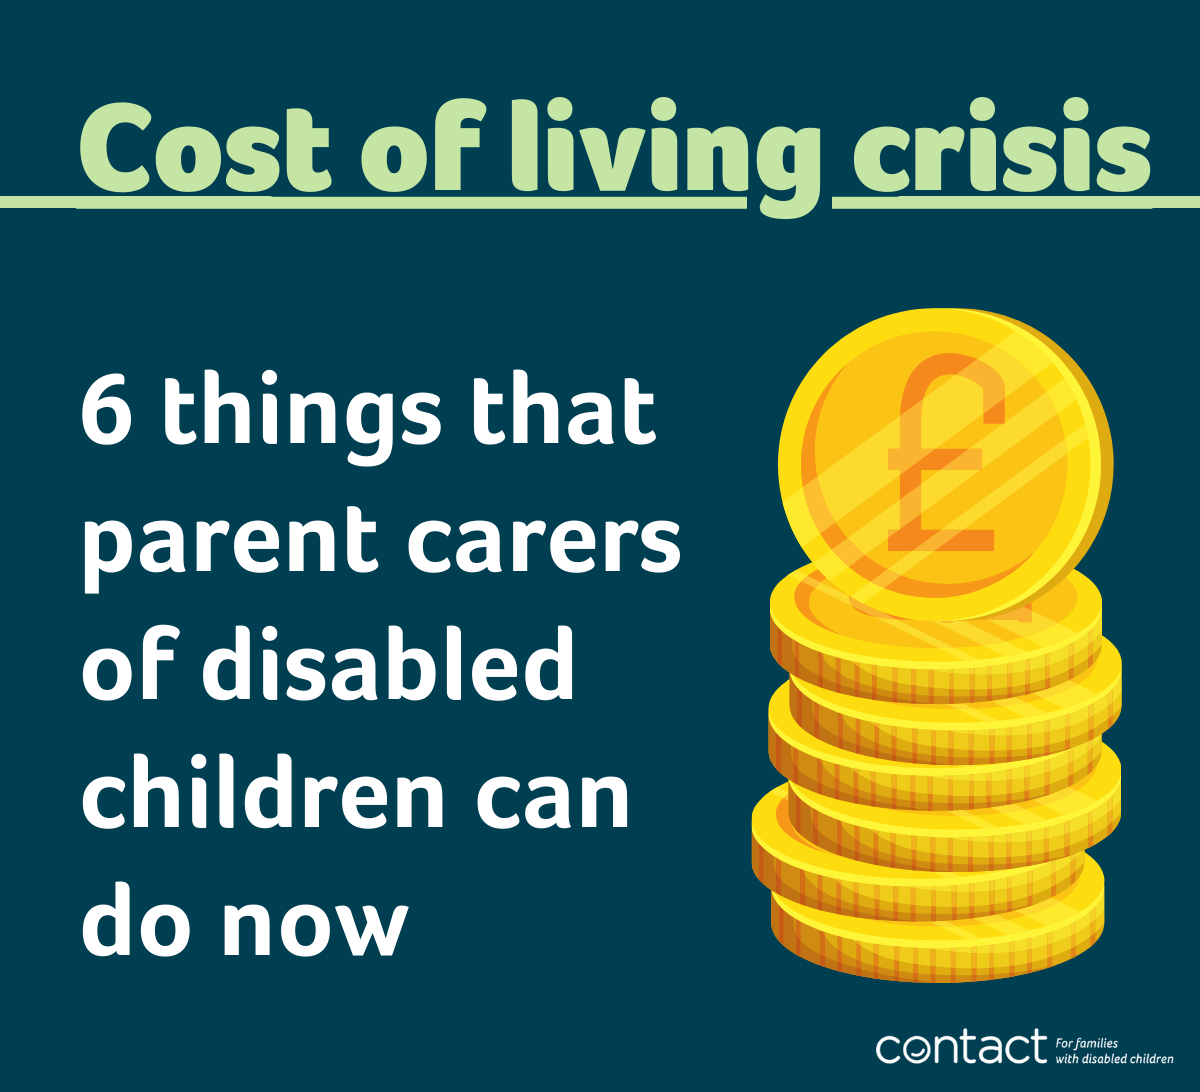 Cost of living crisis: 6 things that parent carers can do now